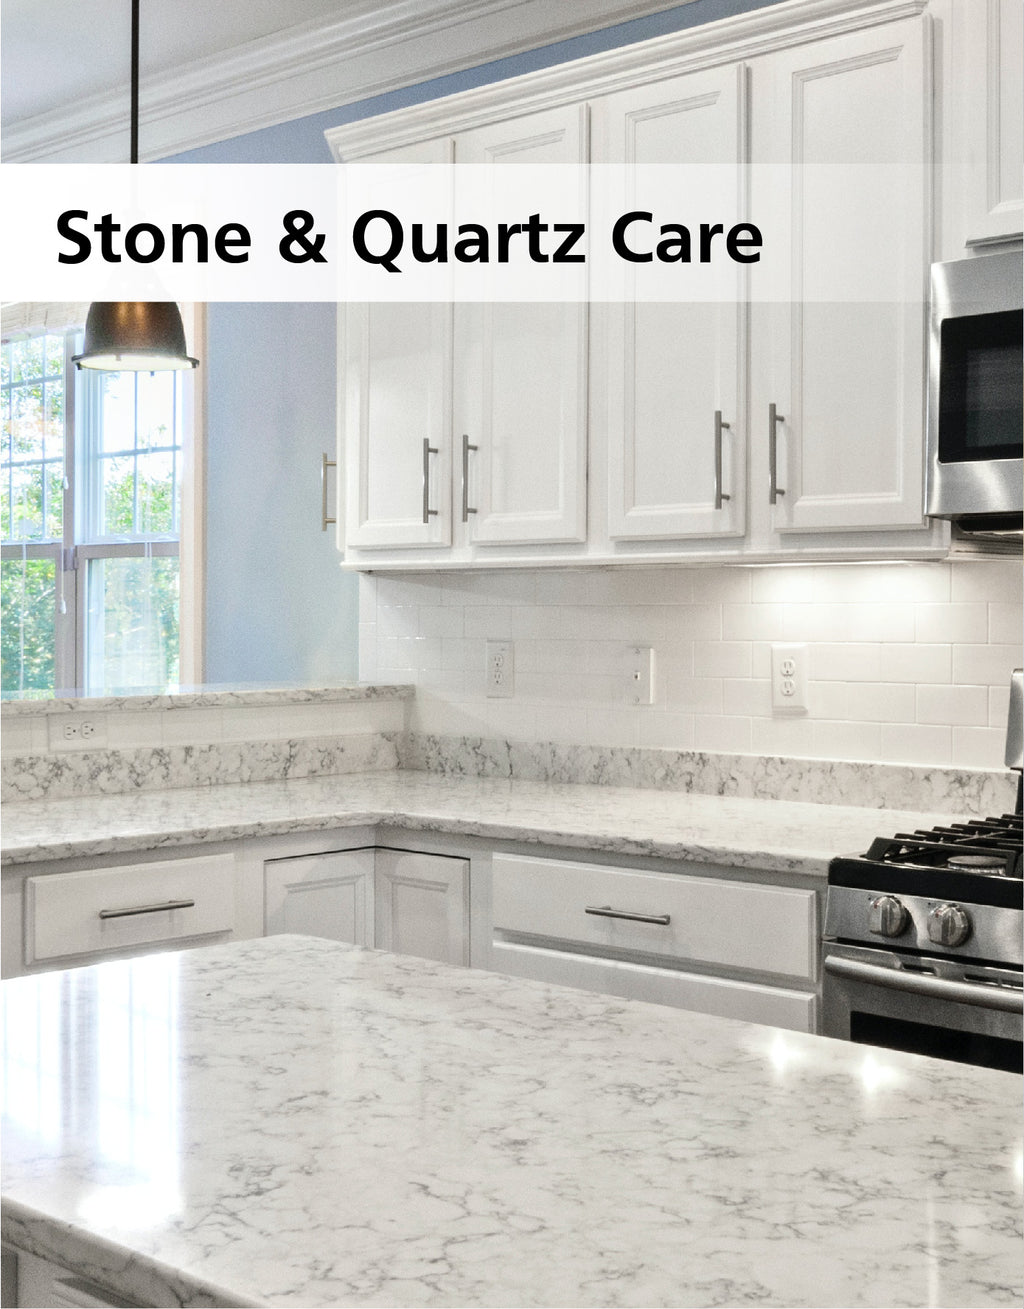 The words stone and quartz care with picture of granite countertops in kitchen